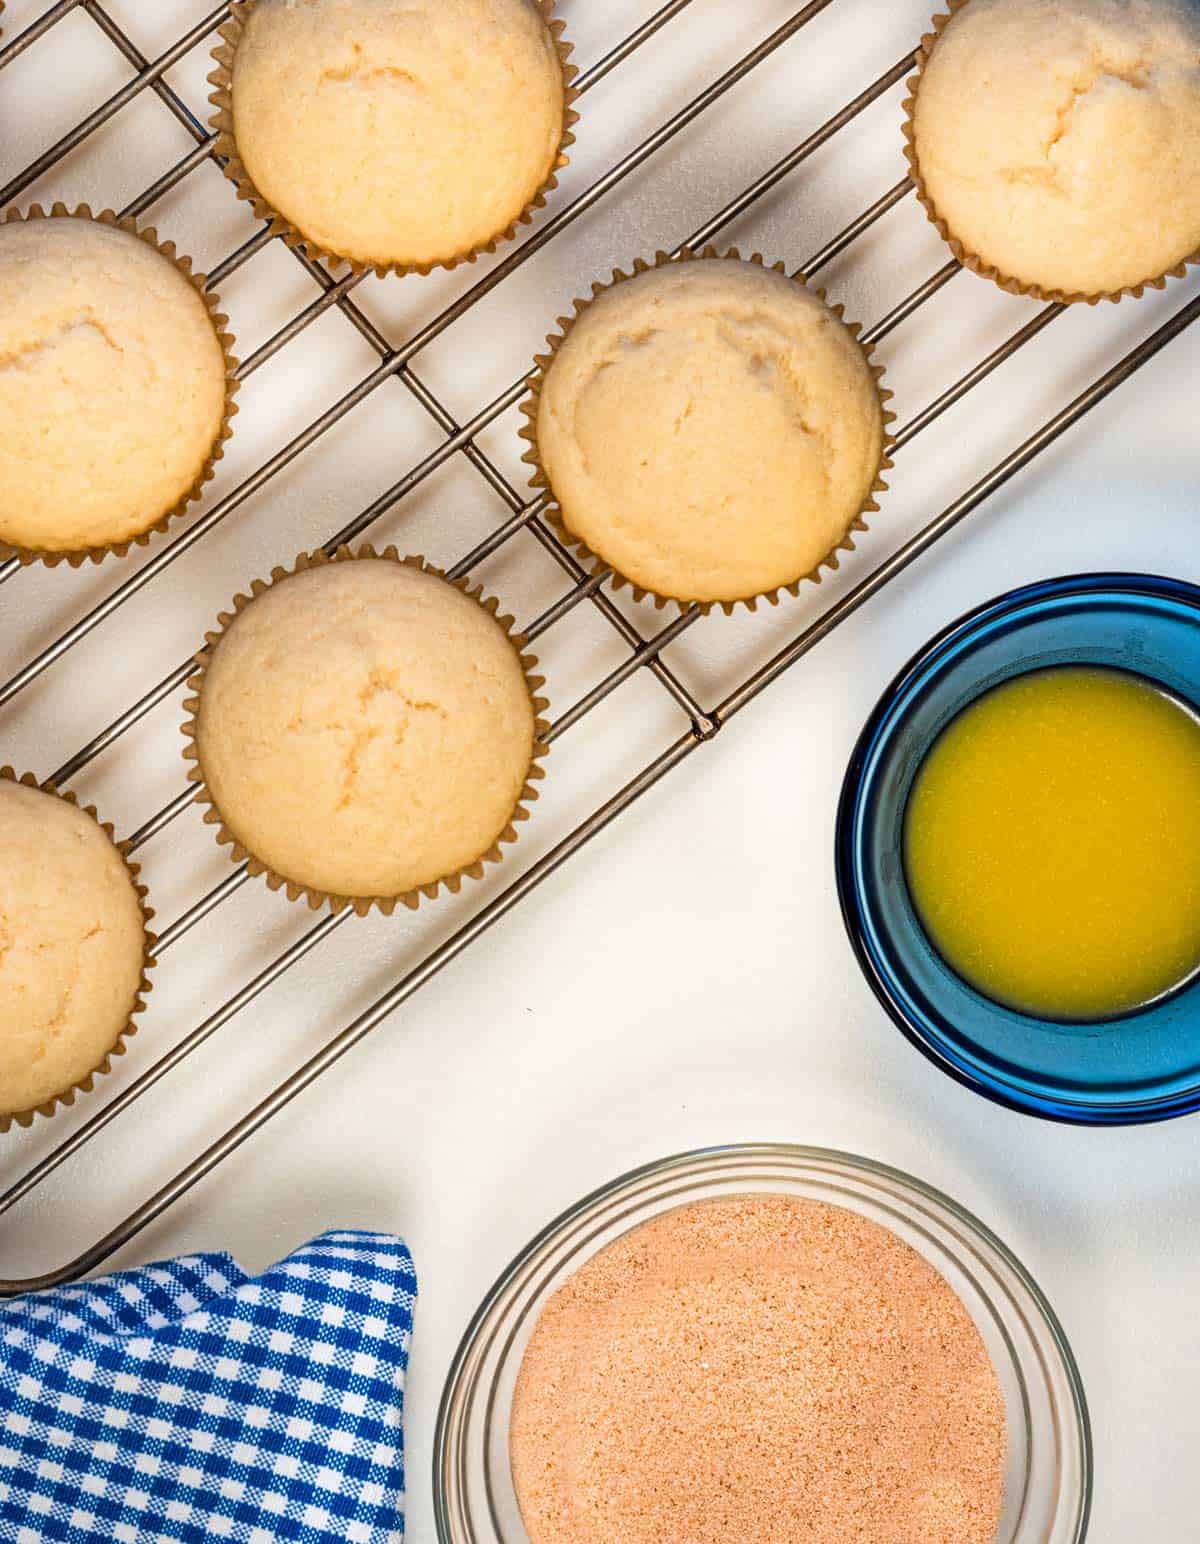 Muffins on a cooling rack with a dish of melted butter next to them and a dish of cinnamon and sugar.